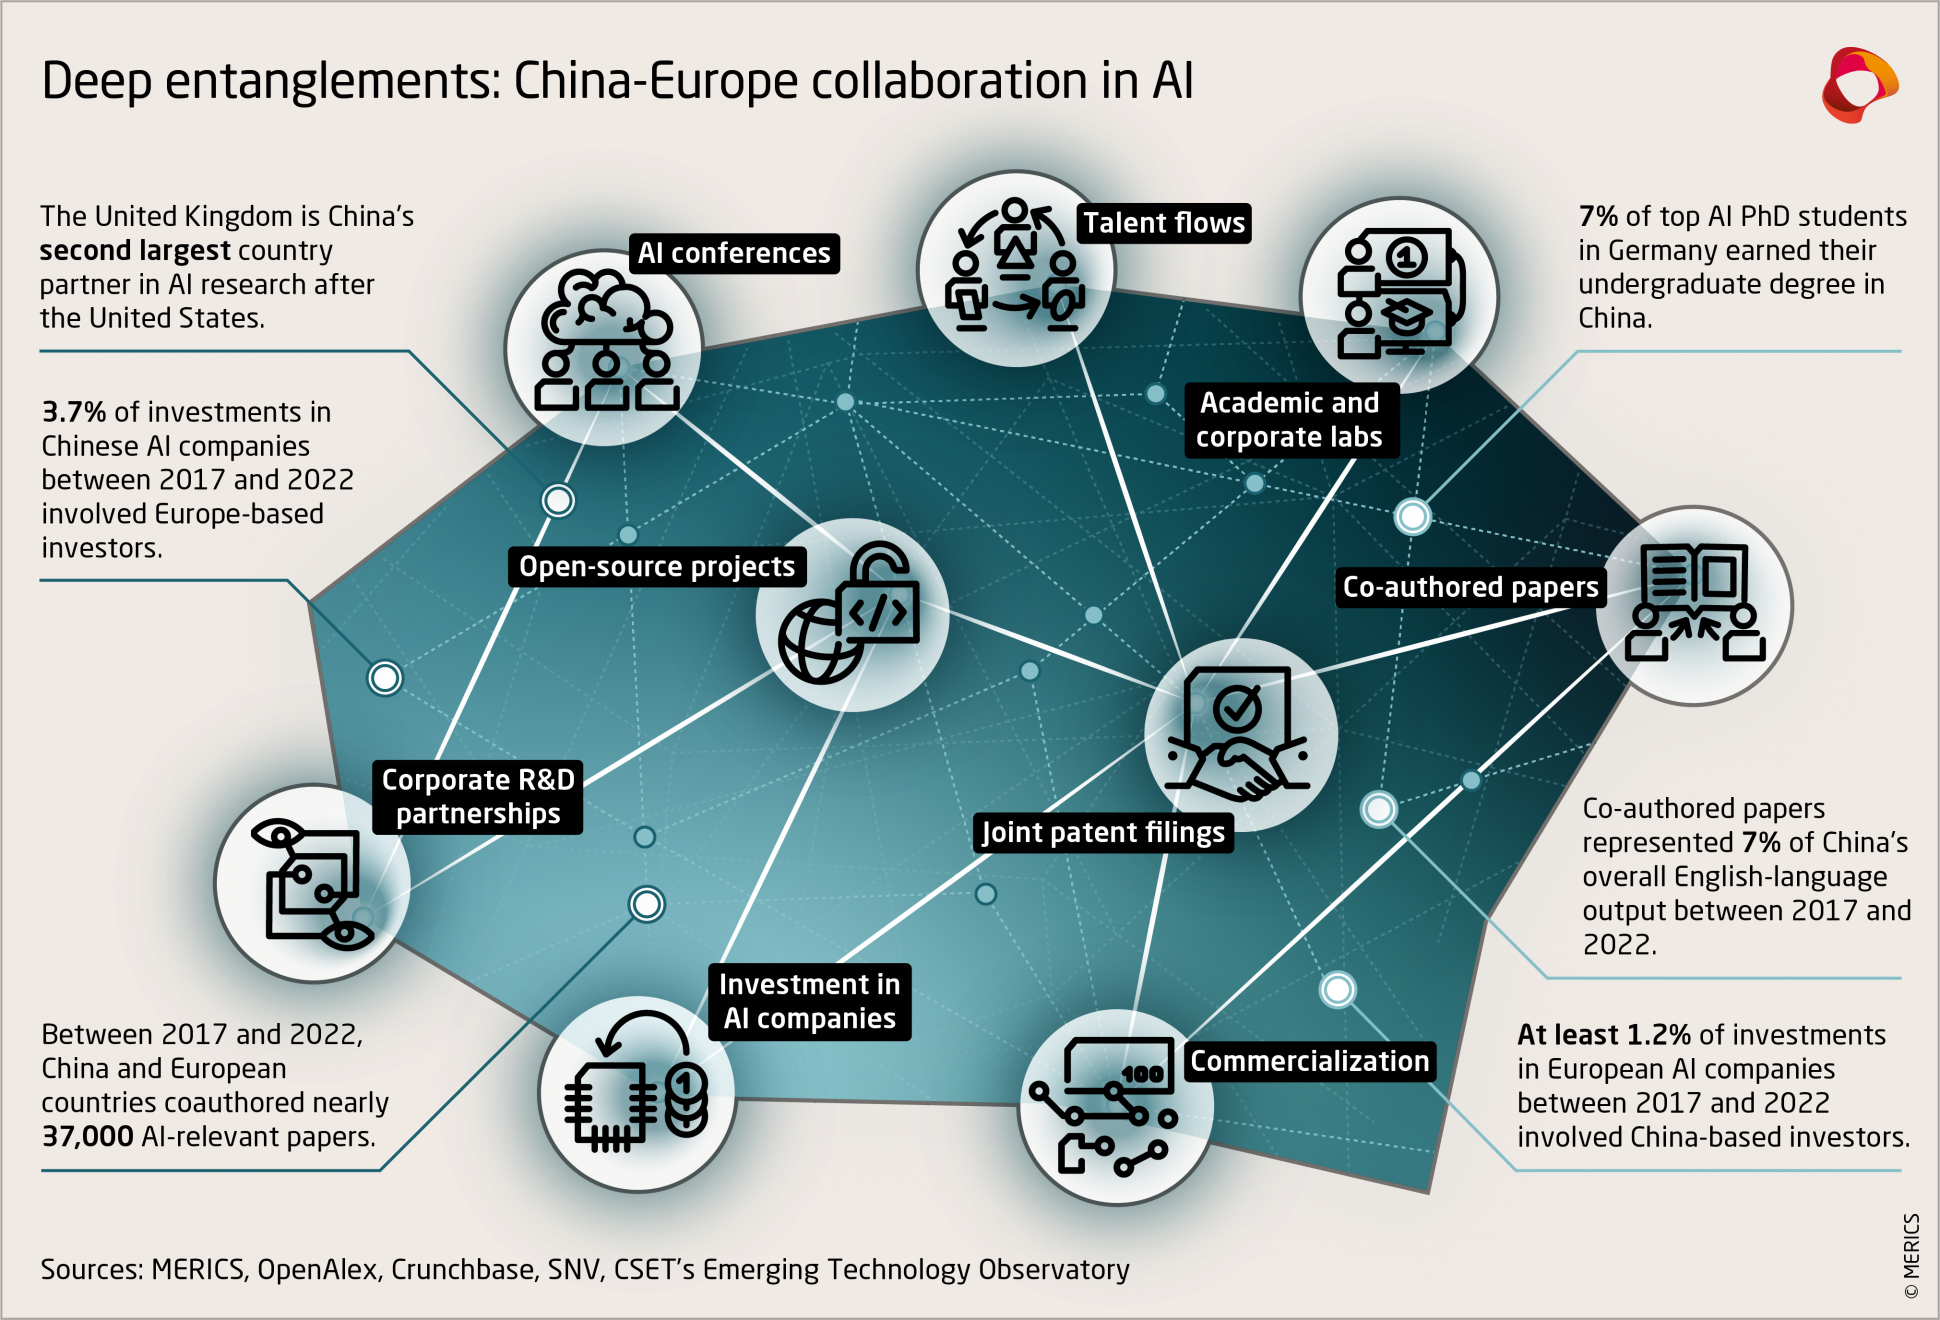 merics-deep-entanglements-china-europe-collaboration-in-ai.png